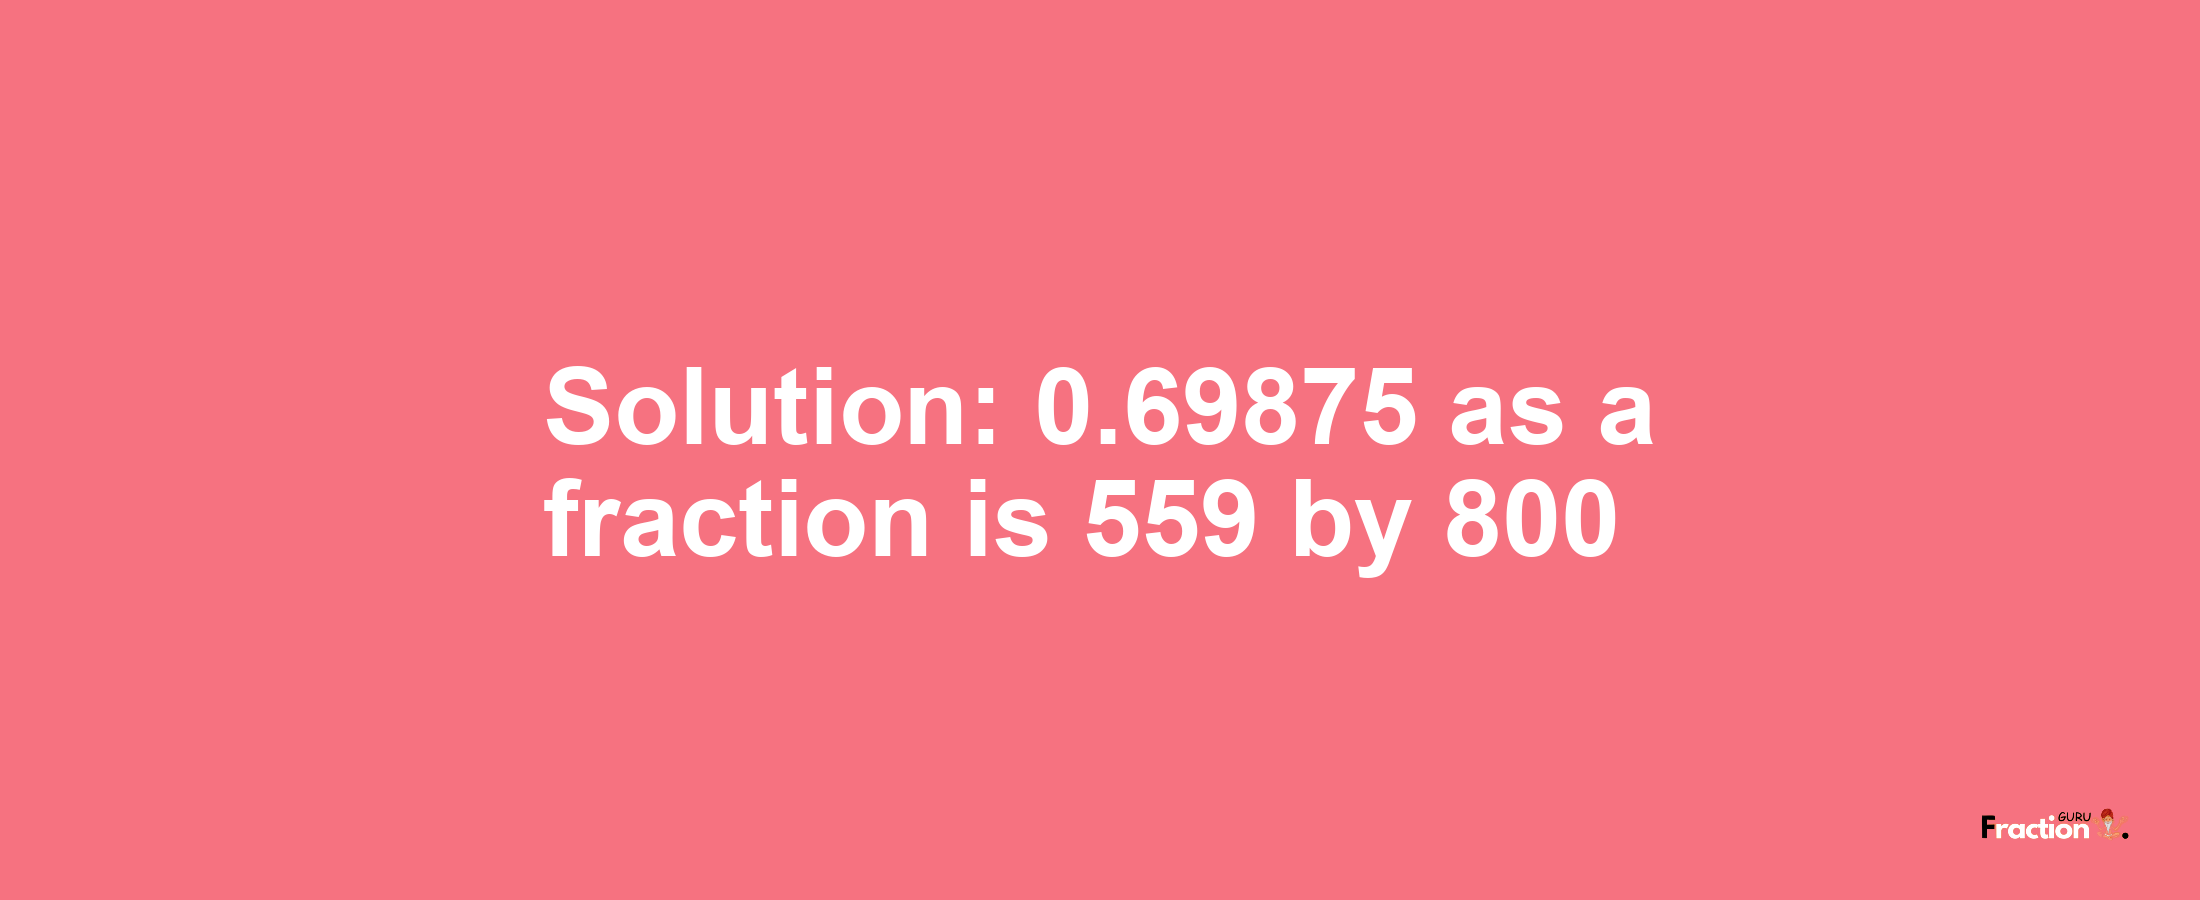 Solution:0.69875 as a fraction is 559/800